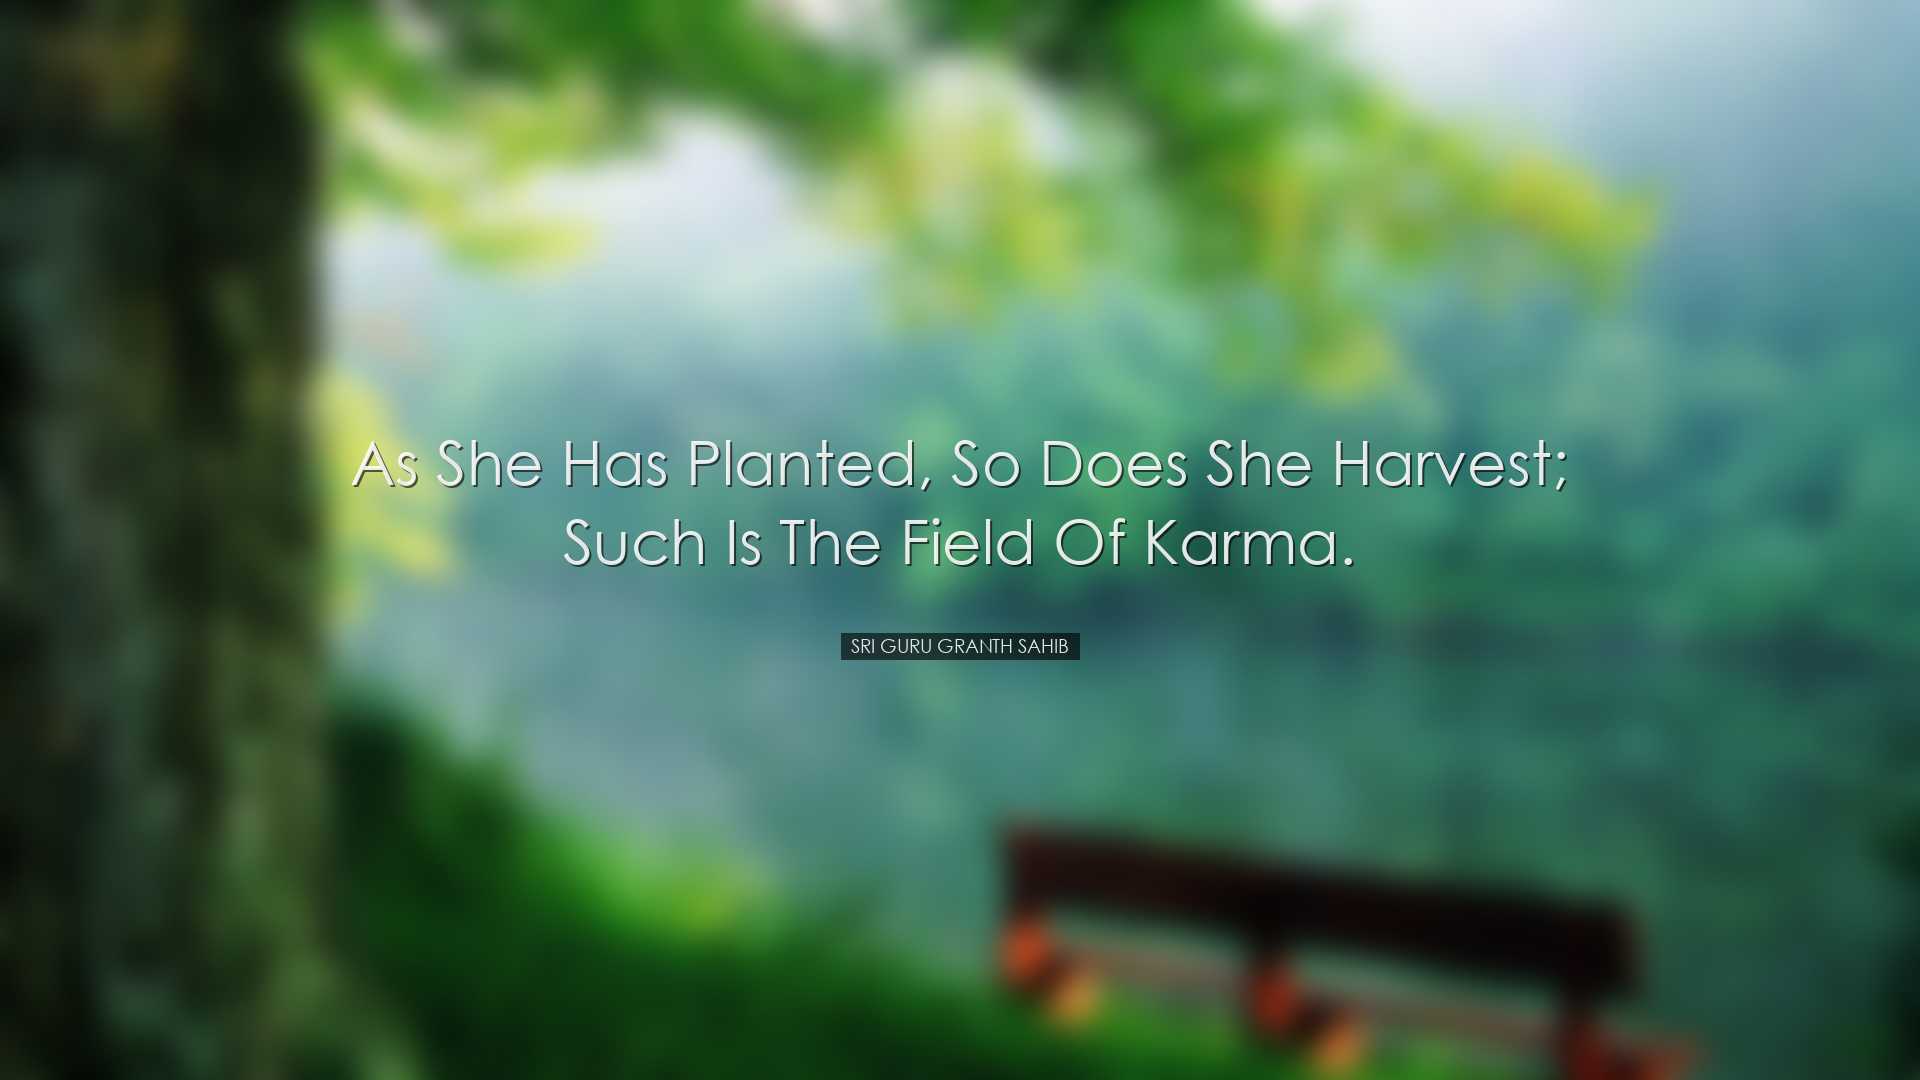 As she has planted, so does she harvest; such is the field of karm